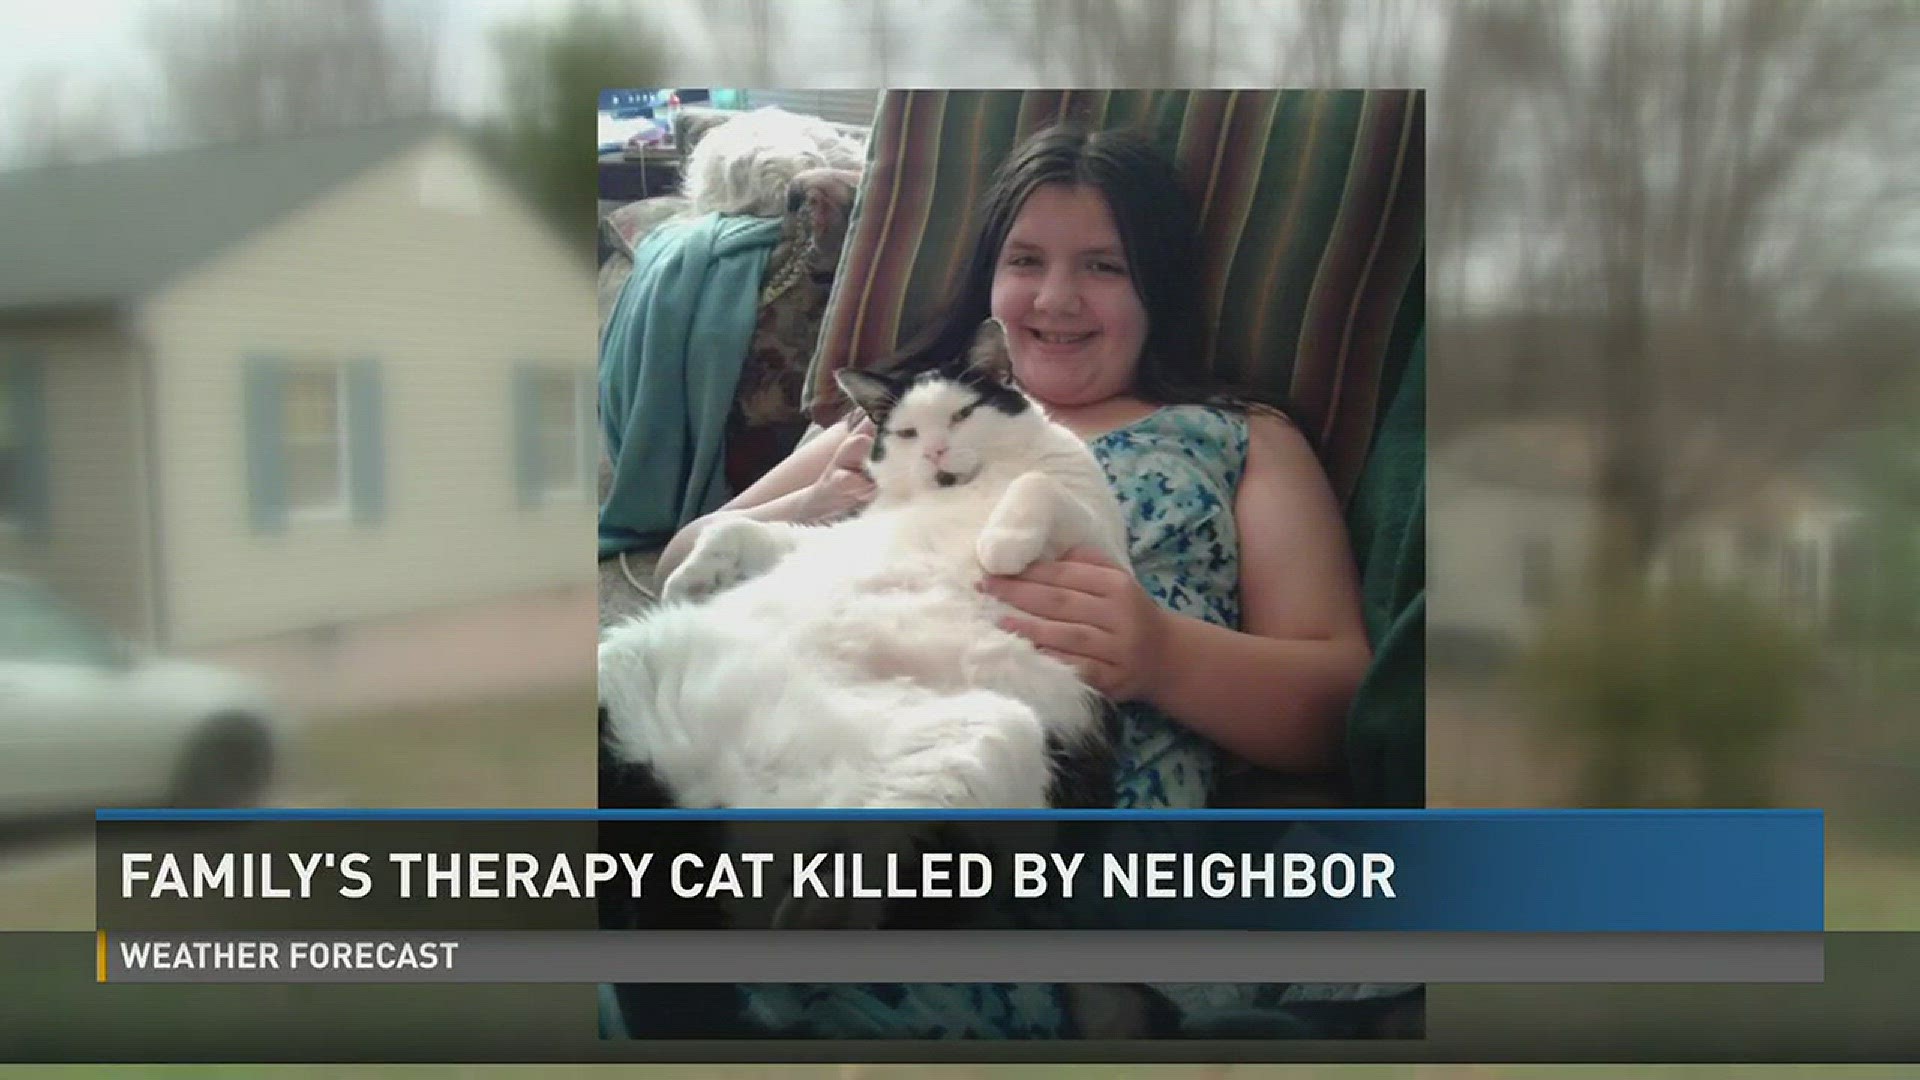 Feb. 2 2017: A family's cat was shot and killed by a neighbor when that cat entered his yard.